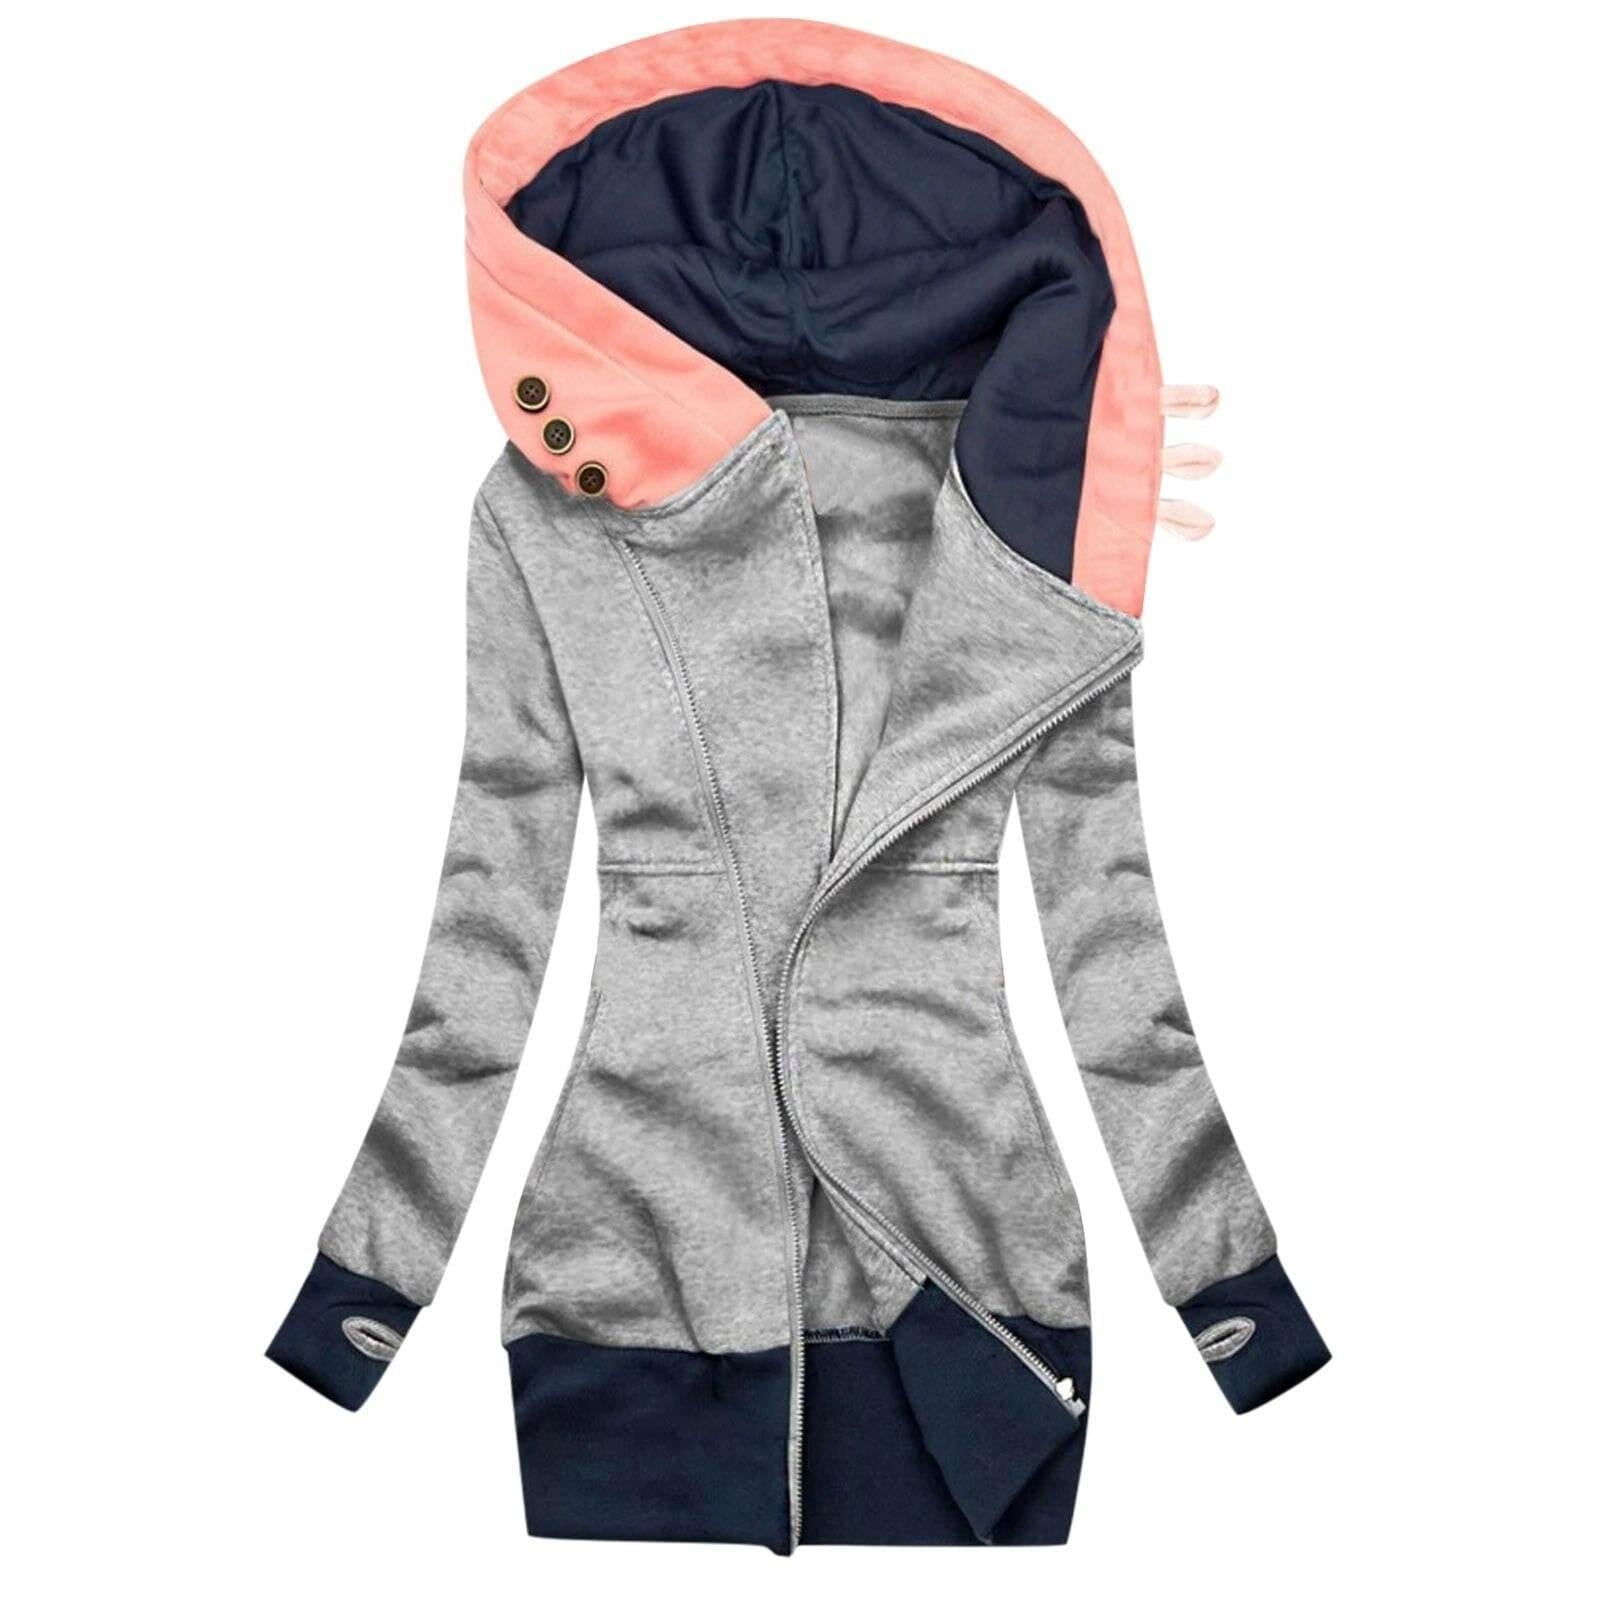 Women's Solid Color Hooded Fashion Jacket - For Women USA